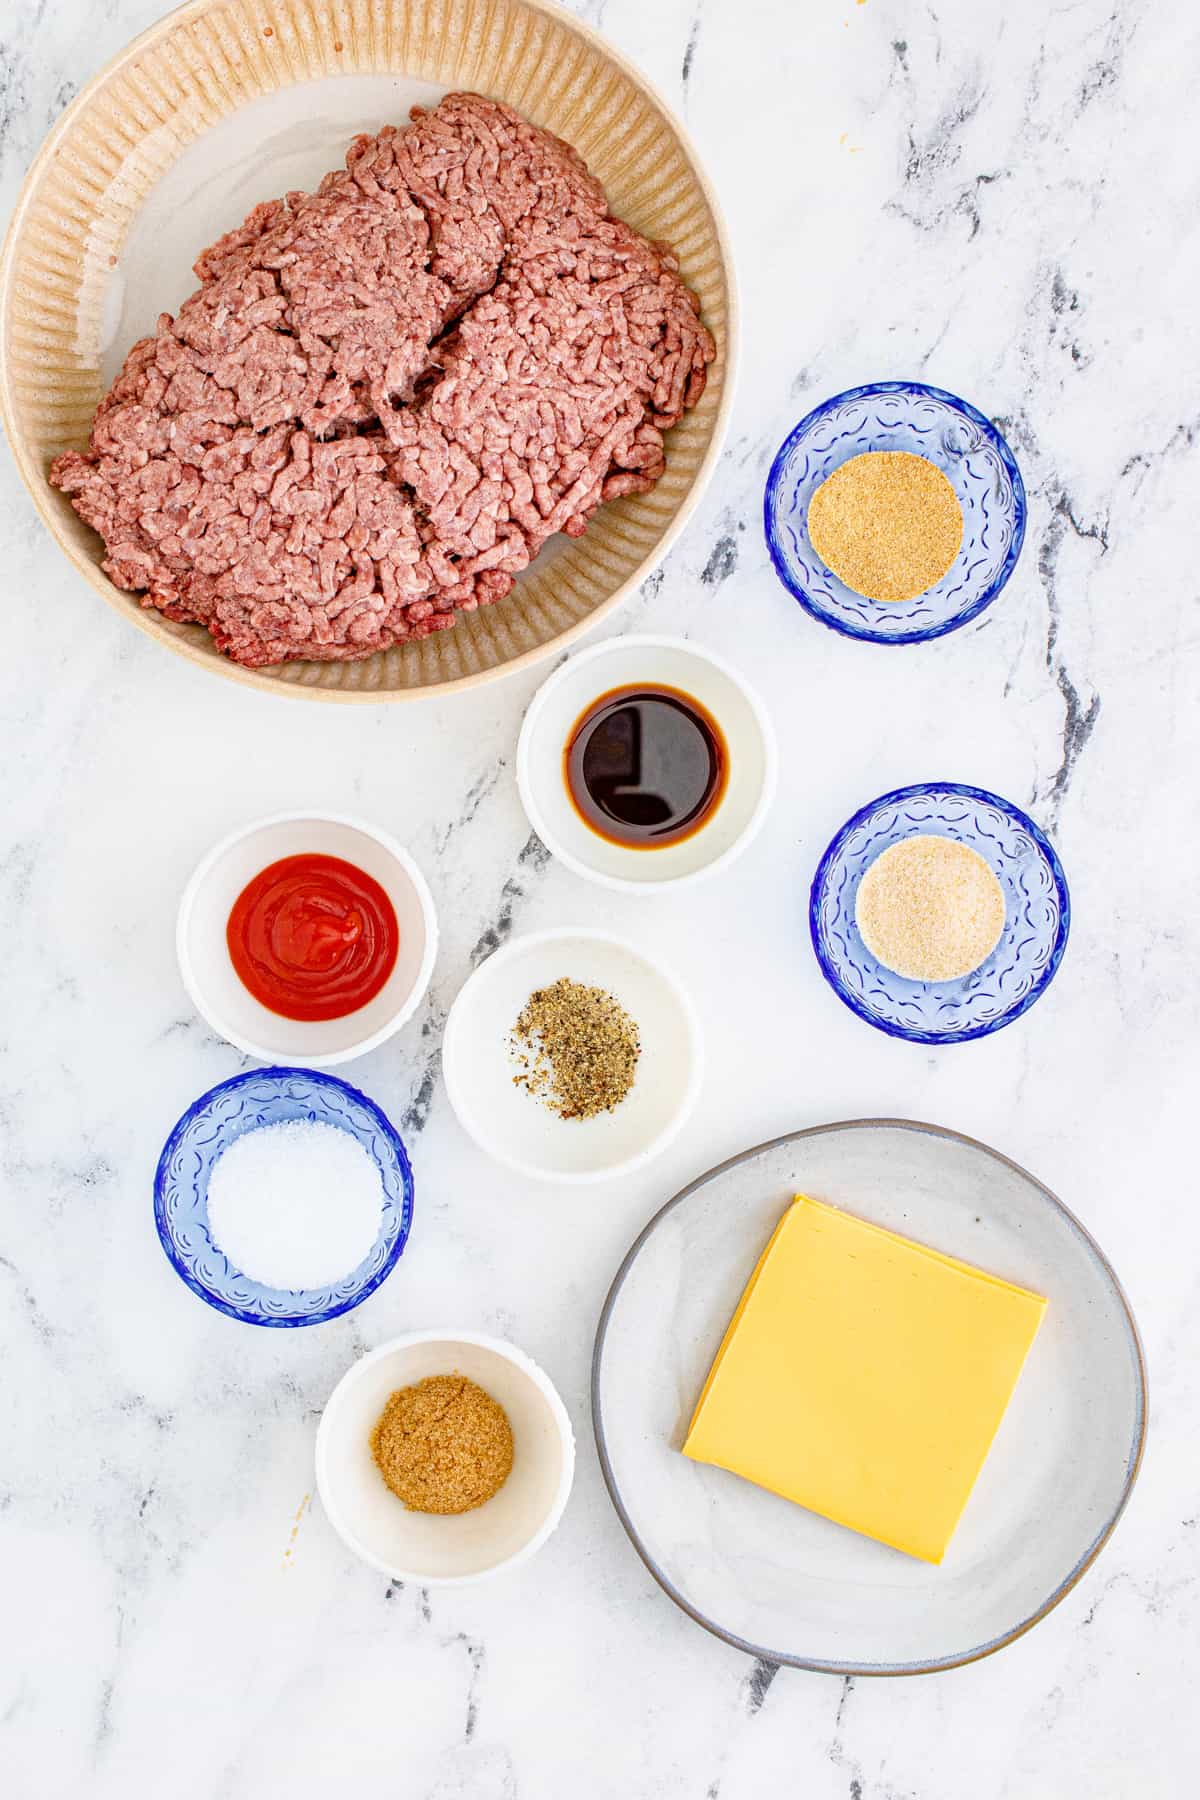 Ingredients needed to make a Cheeseburger Recipe.